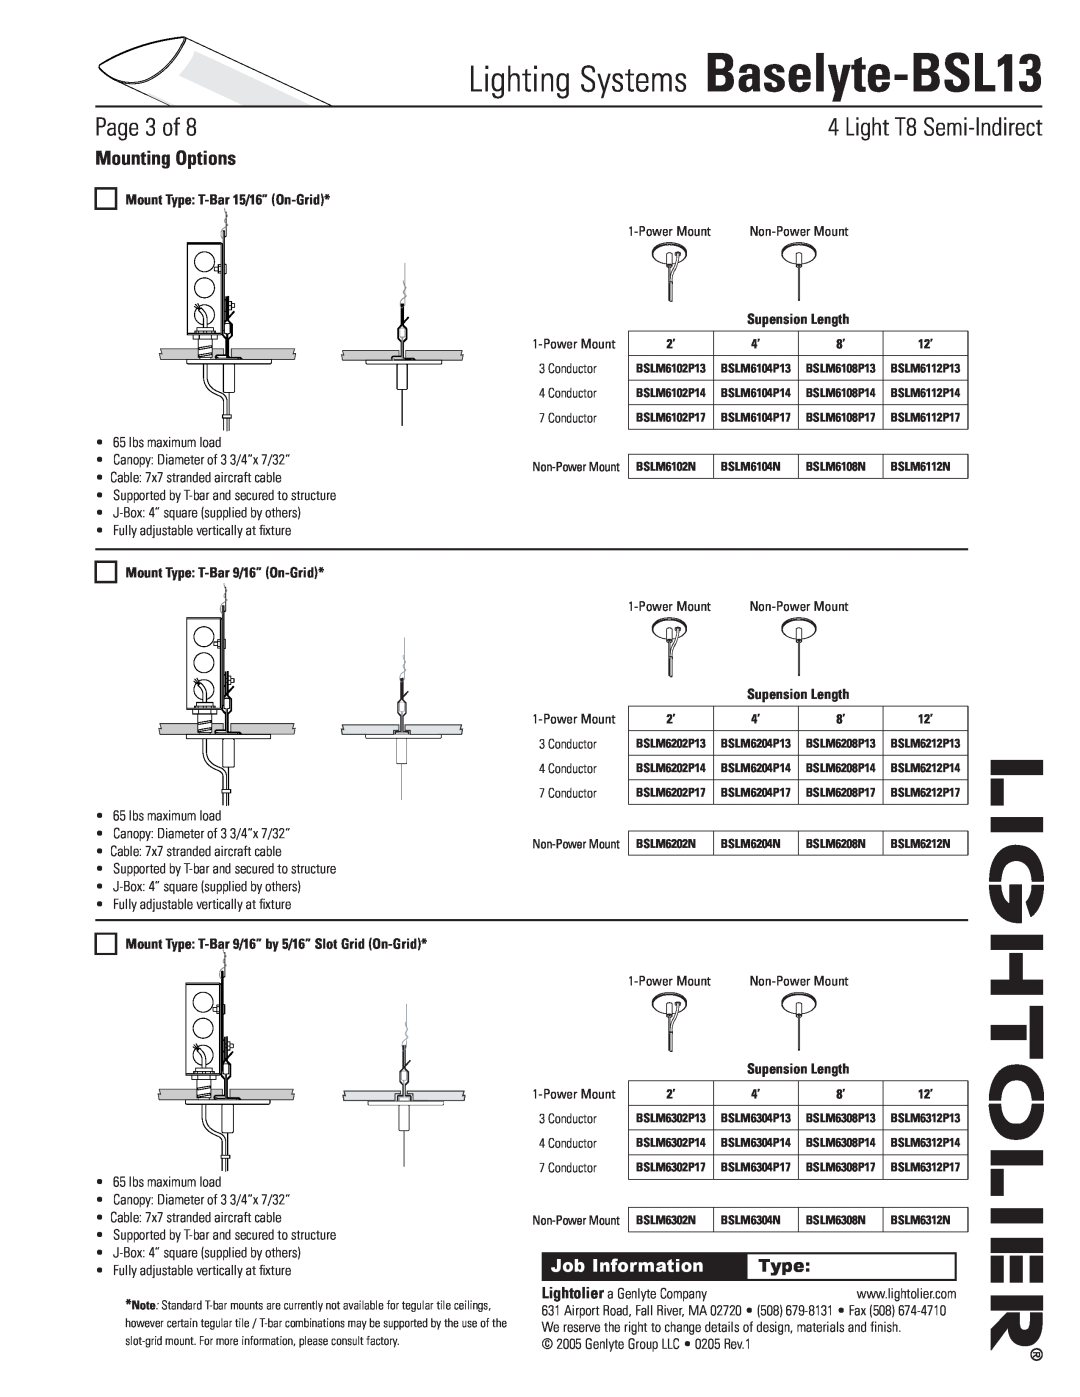 Lightolier Baselyte-BSL13 Mounting Options, Mount Type T-Bar15/16” On-Grid, Supension Length, Page of, Job Information 